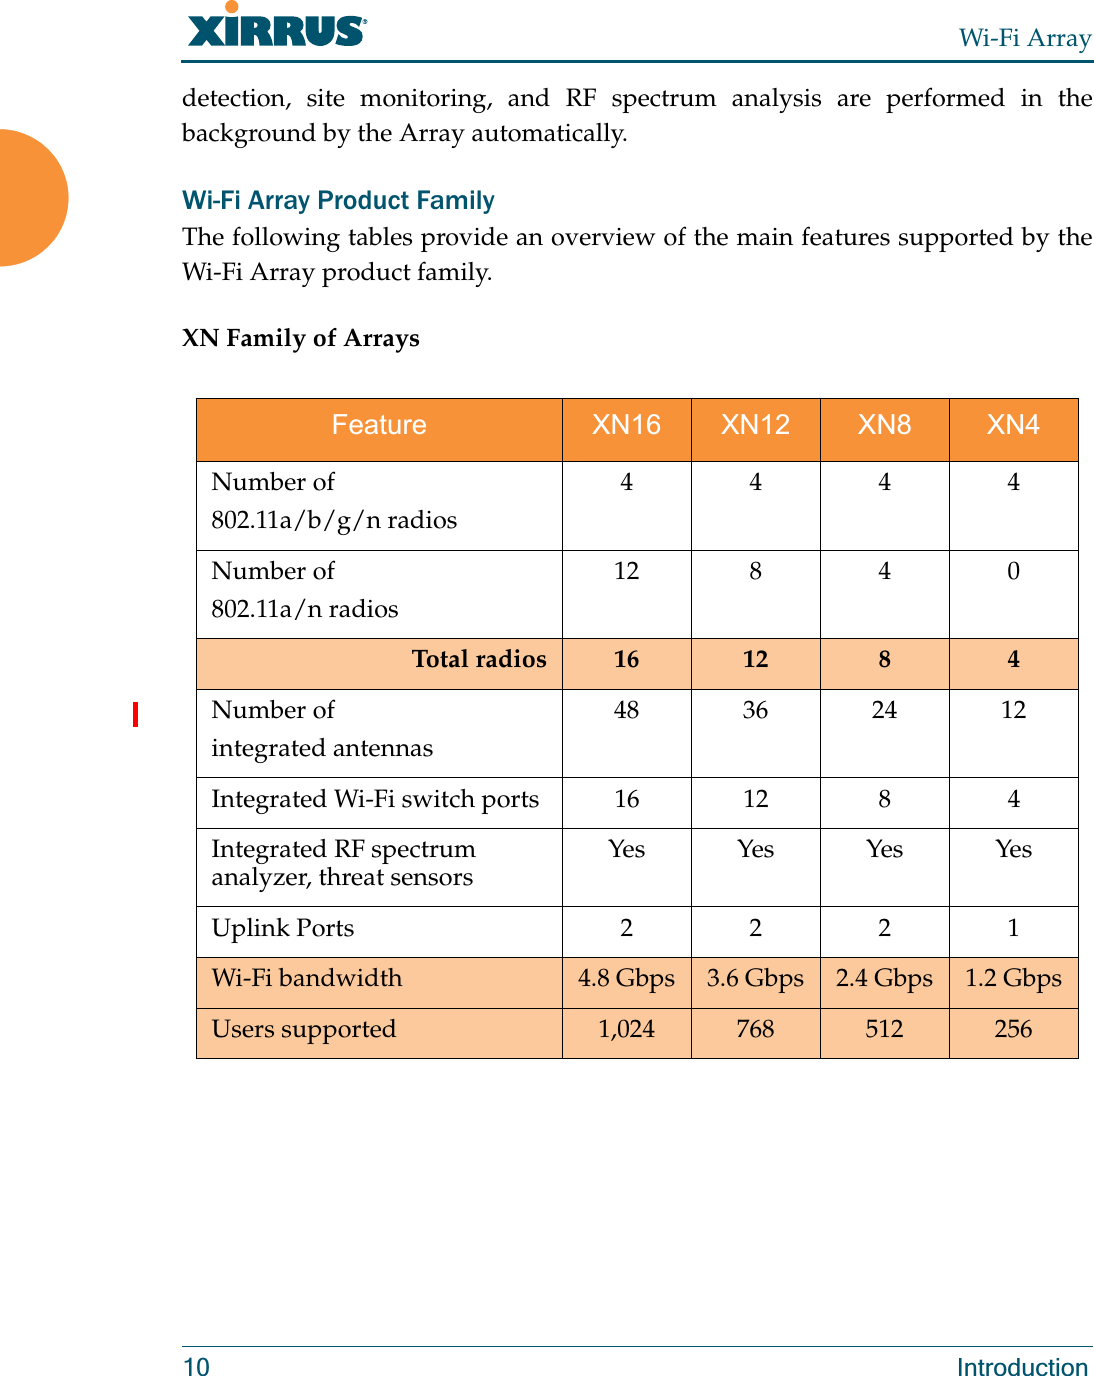 Wi-Fi Array10 Introductiondetection, site monitoring, and RF spectrum analysis are performed in the background by the Array automatically.Wi-Fi Array Product FamilyThe following tables provide an overview of the main features supported by the Wi-Fi Array product family.XN Family of Arrays Feature XN16 XN12 XN8 XN4Number of802.11a/b/g/n radios4444Number of802.11a/n radios12840Tota l radi os 16 12 8 4Number ofintegrated antennas48 36 24 12Integrated Wi-Fi switch ports 16 12 8 4Integrated RF spectrum analyzer, threat sensors Yes Yes Yes YesUplink Ports 2221Wi-Fi bandwidth 4.8 Gbps 3.6 Gbps 2.4 Gbps 1.2 GbpsUsers supported  1,024 768 512 256